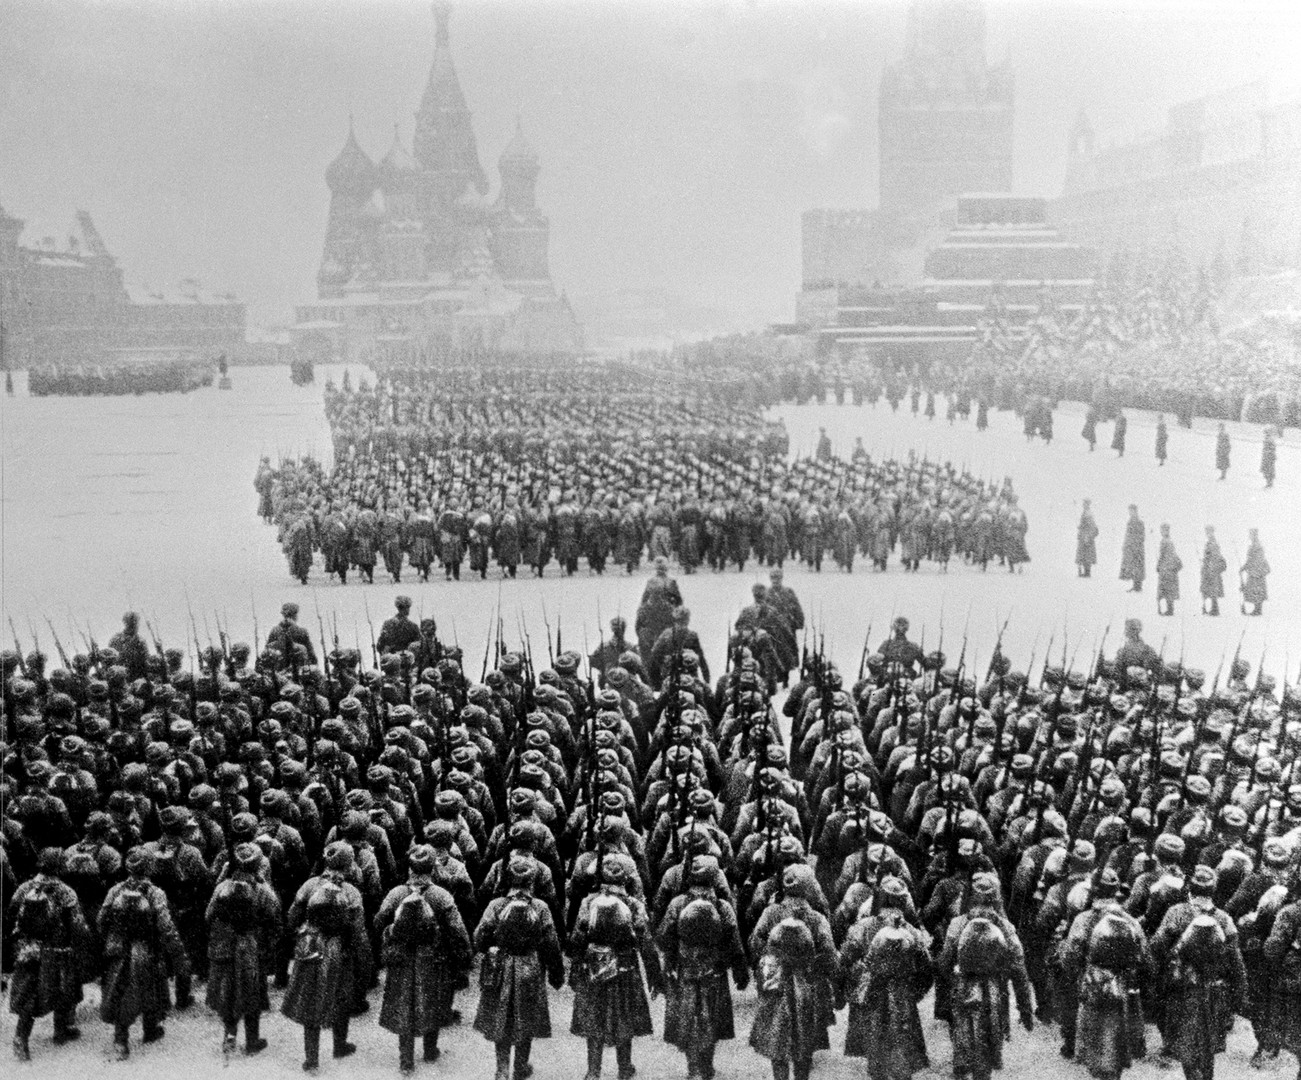 November 7, 1941. Soviet troops parade past the Kremlin and march on to the front line.